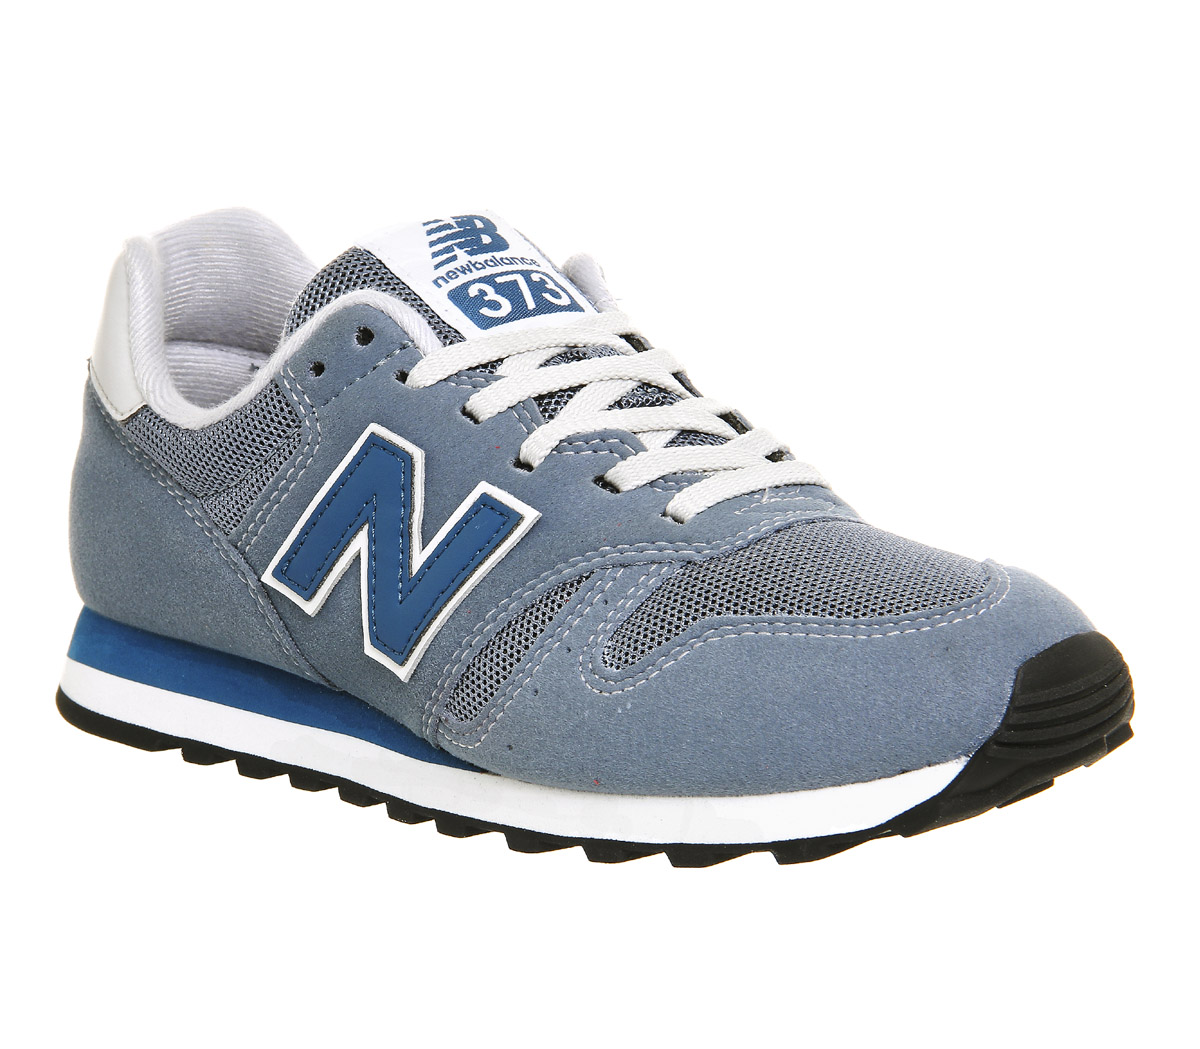 New Balance M373 Grey Blue - His trainers